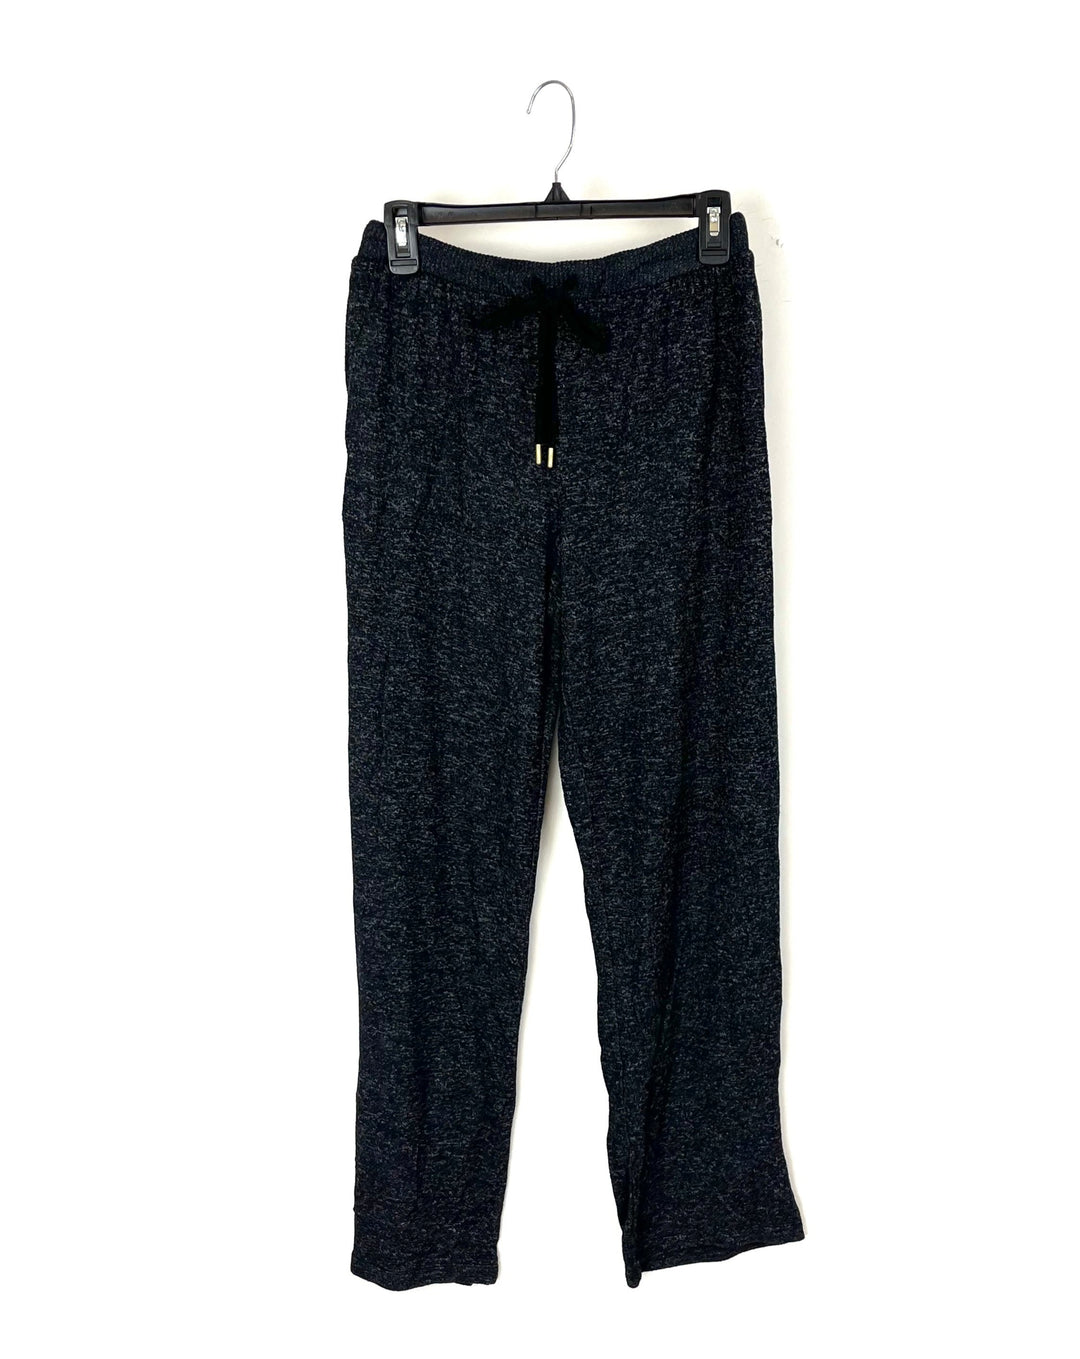 Black And Grey Knit Loungewear Bottoms - Small